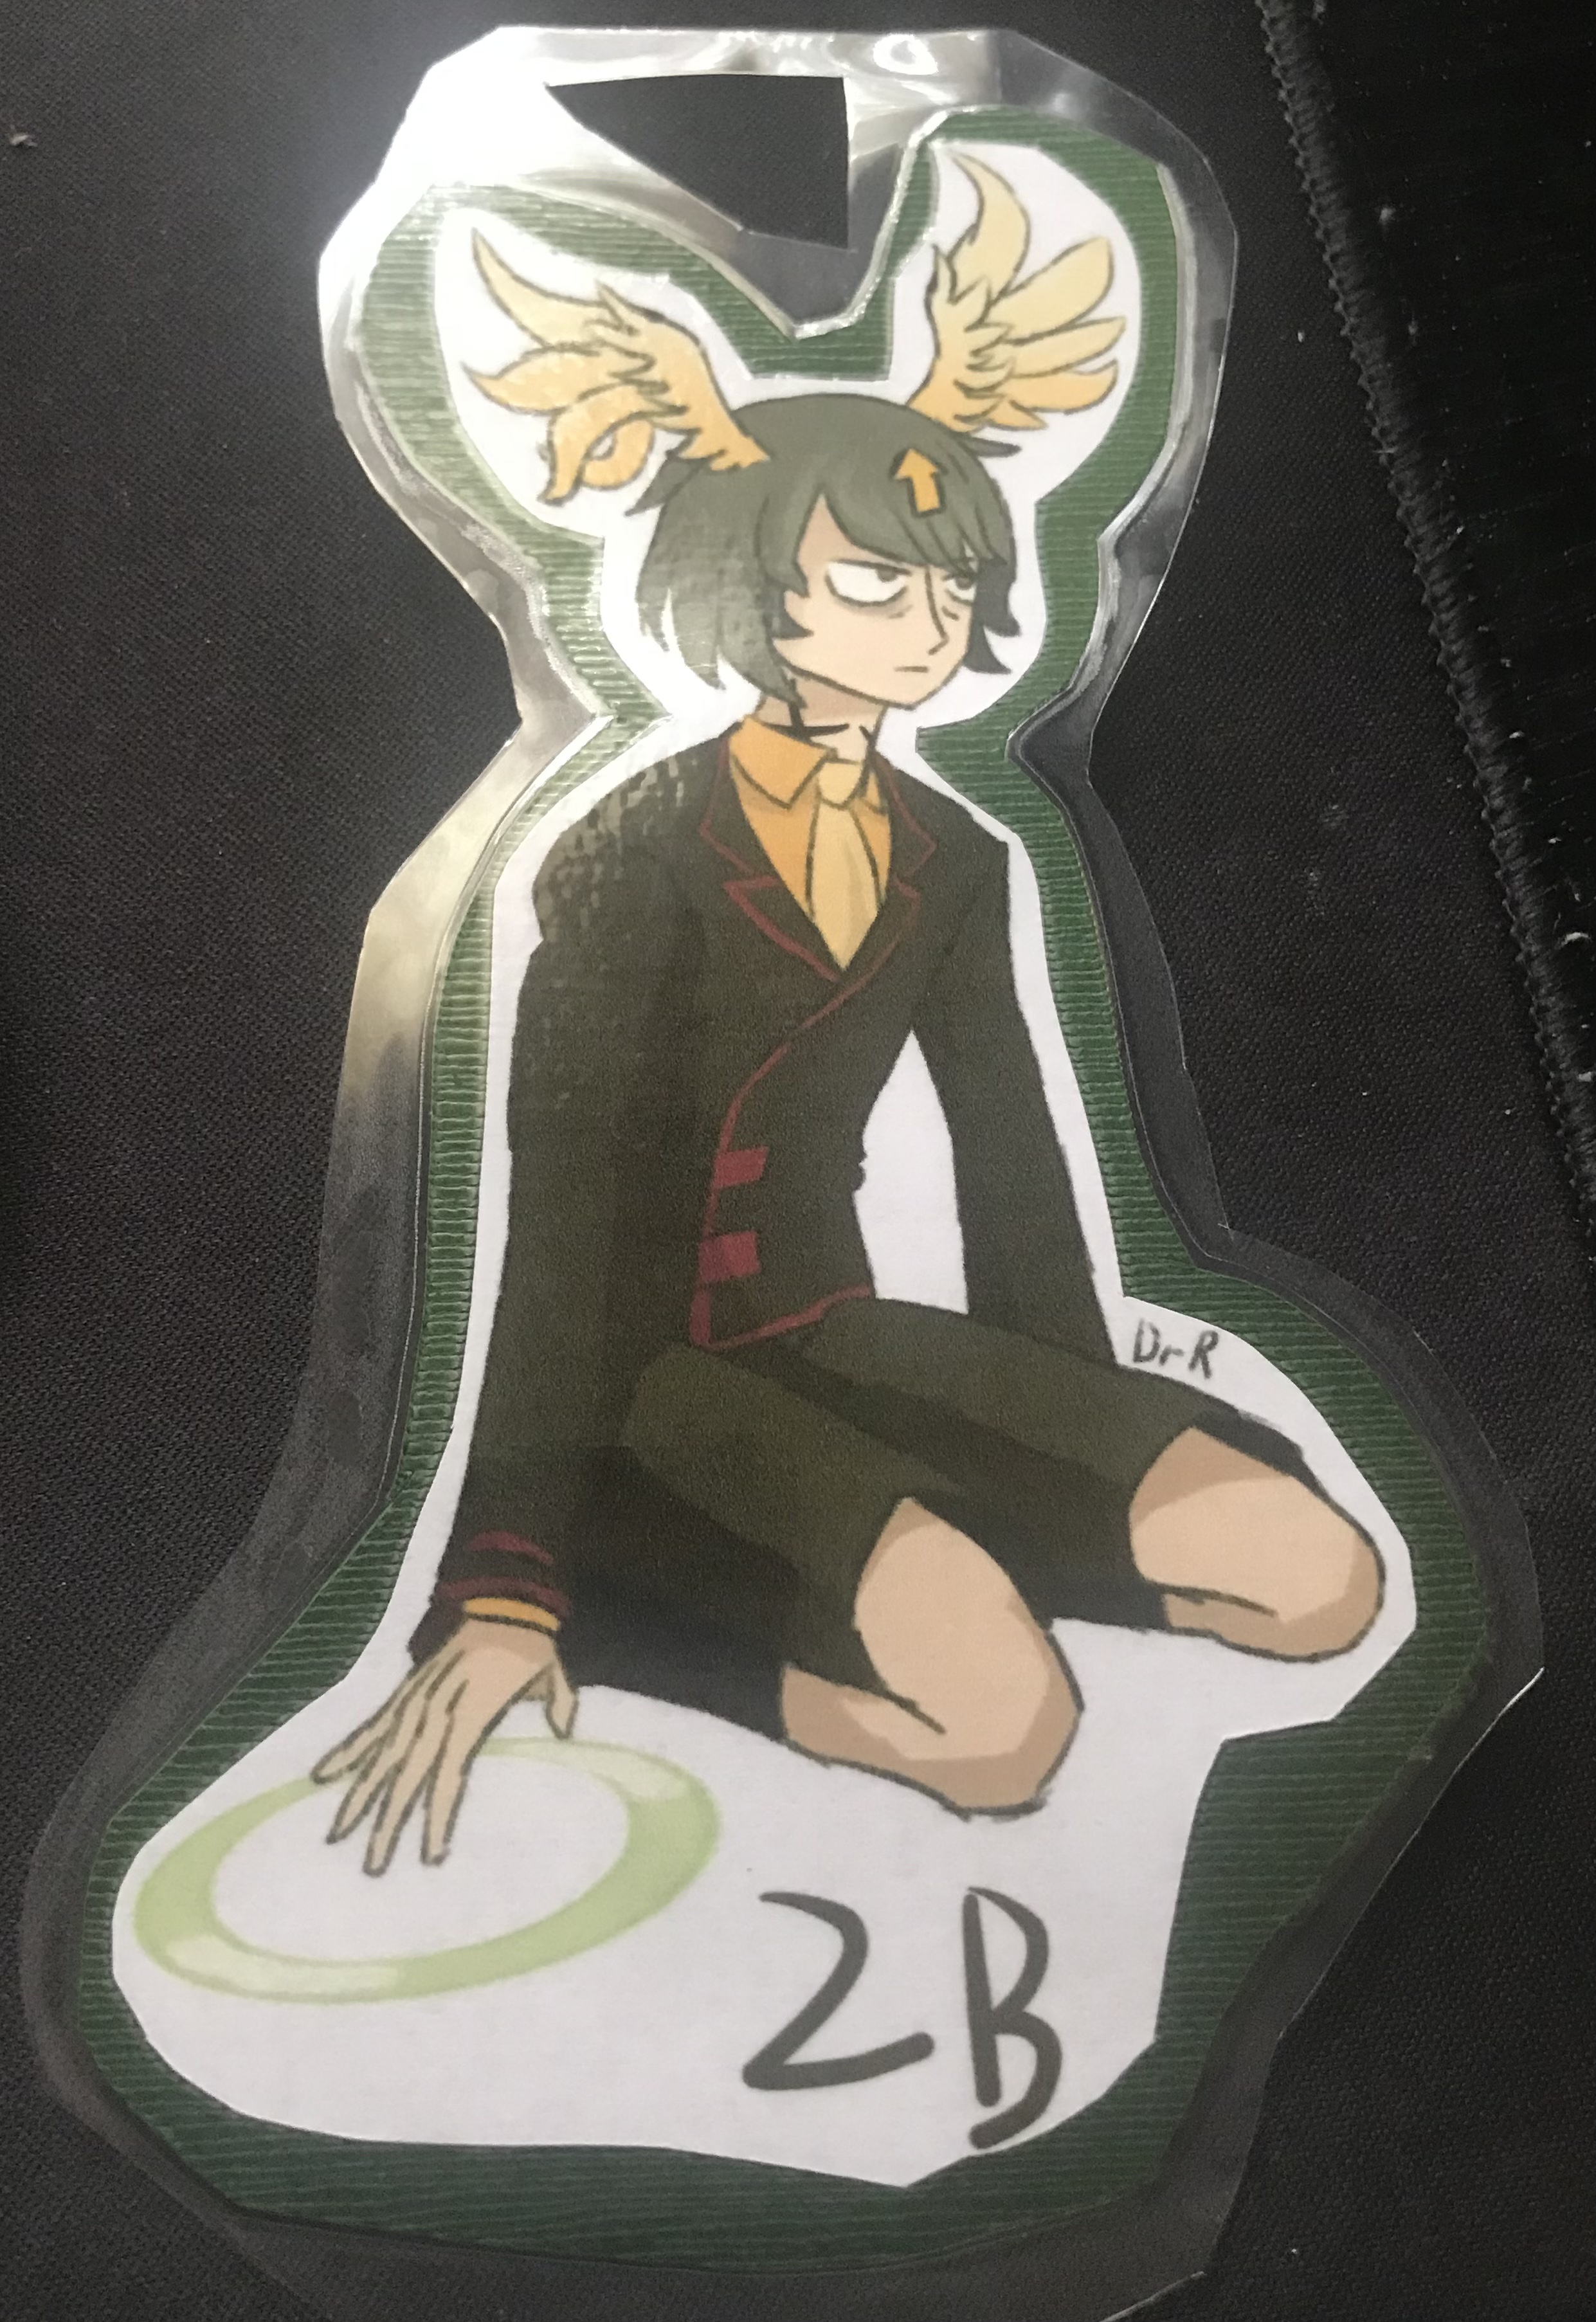 a badge of Delilah dressed like Noah from Daemon bride. They are crouched down while '2B' is beneath them